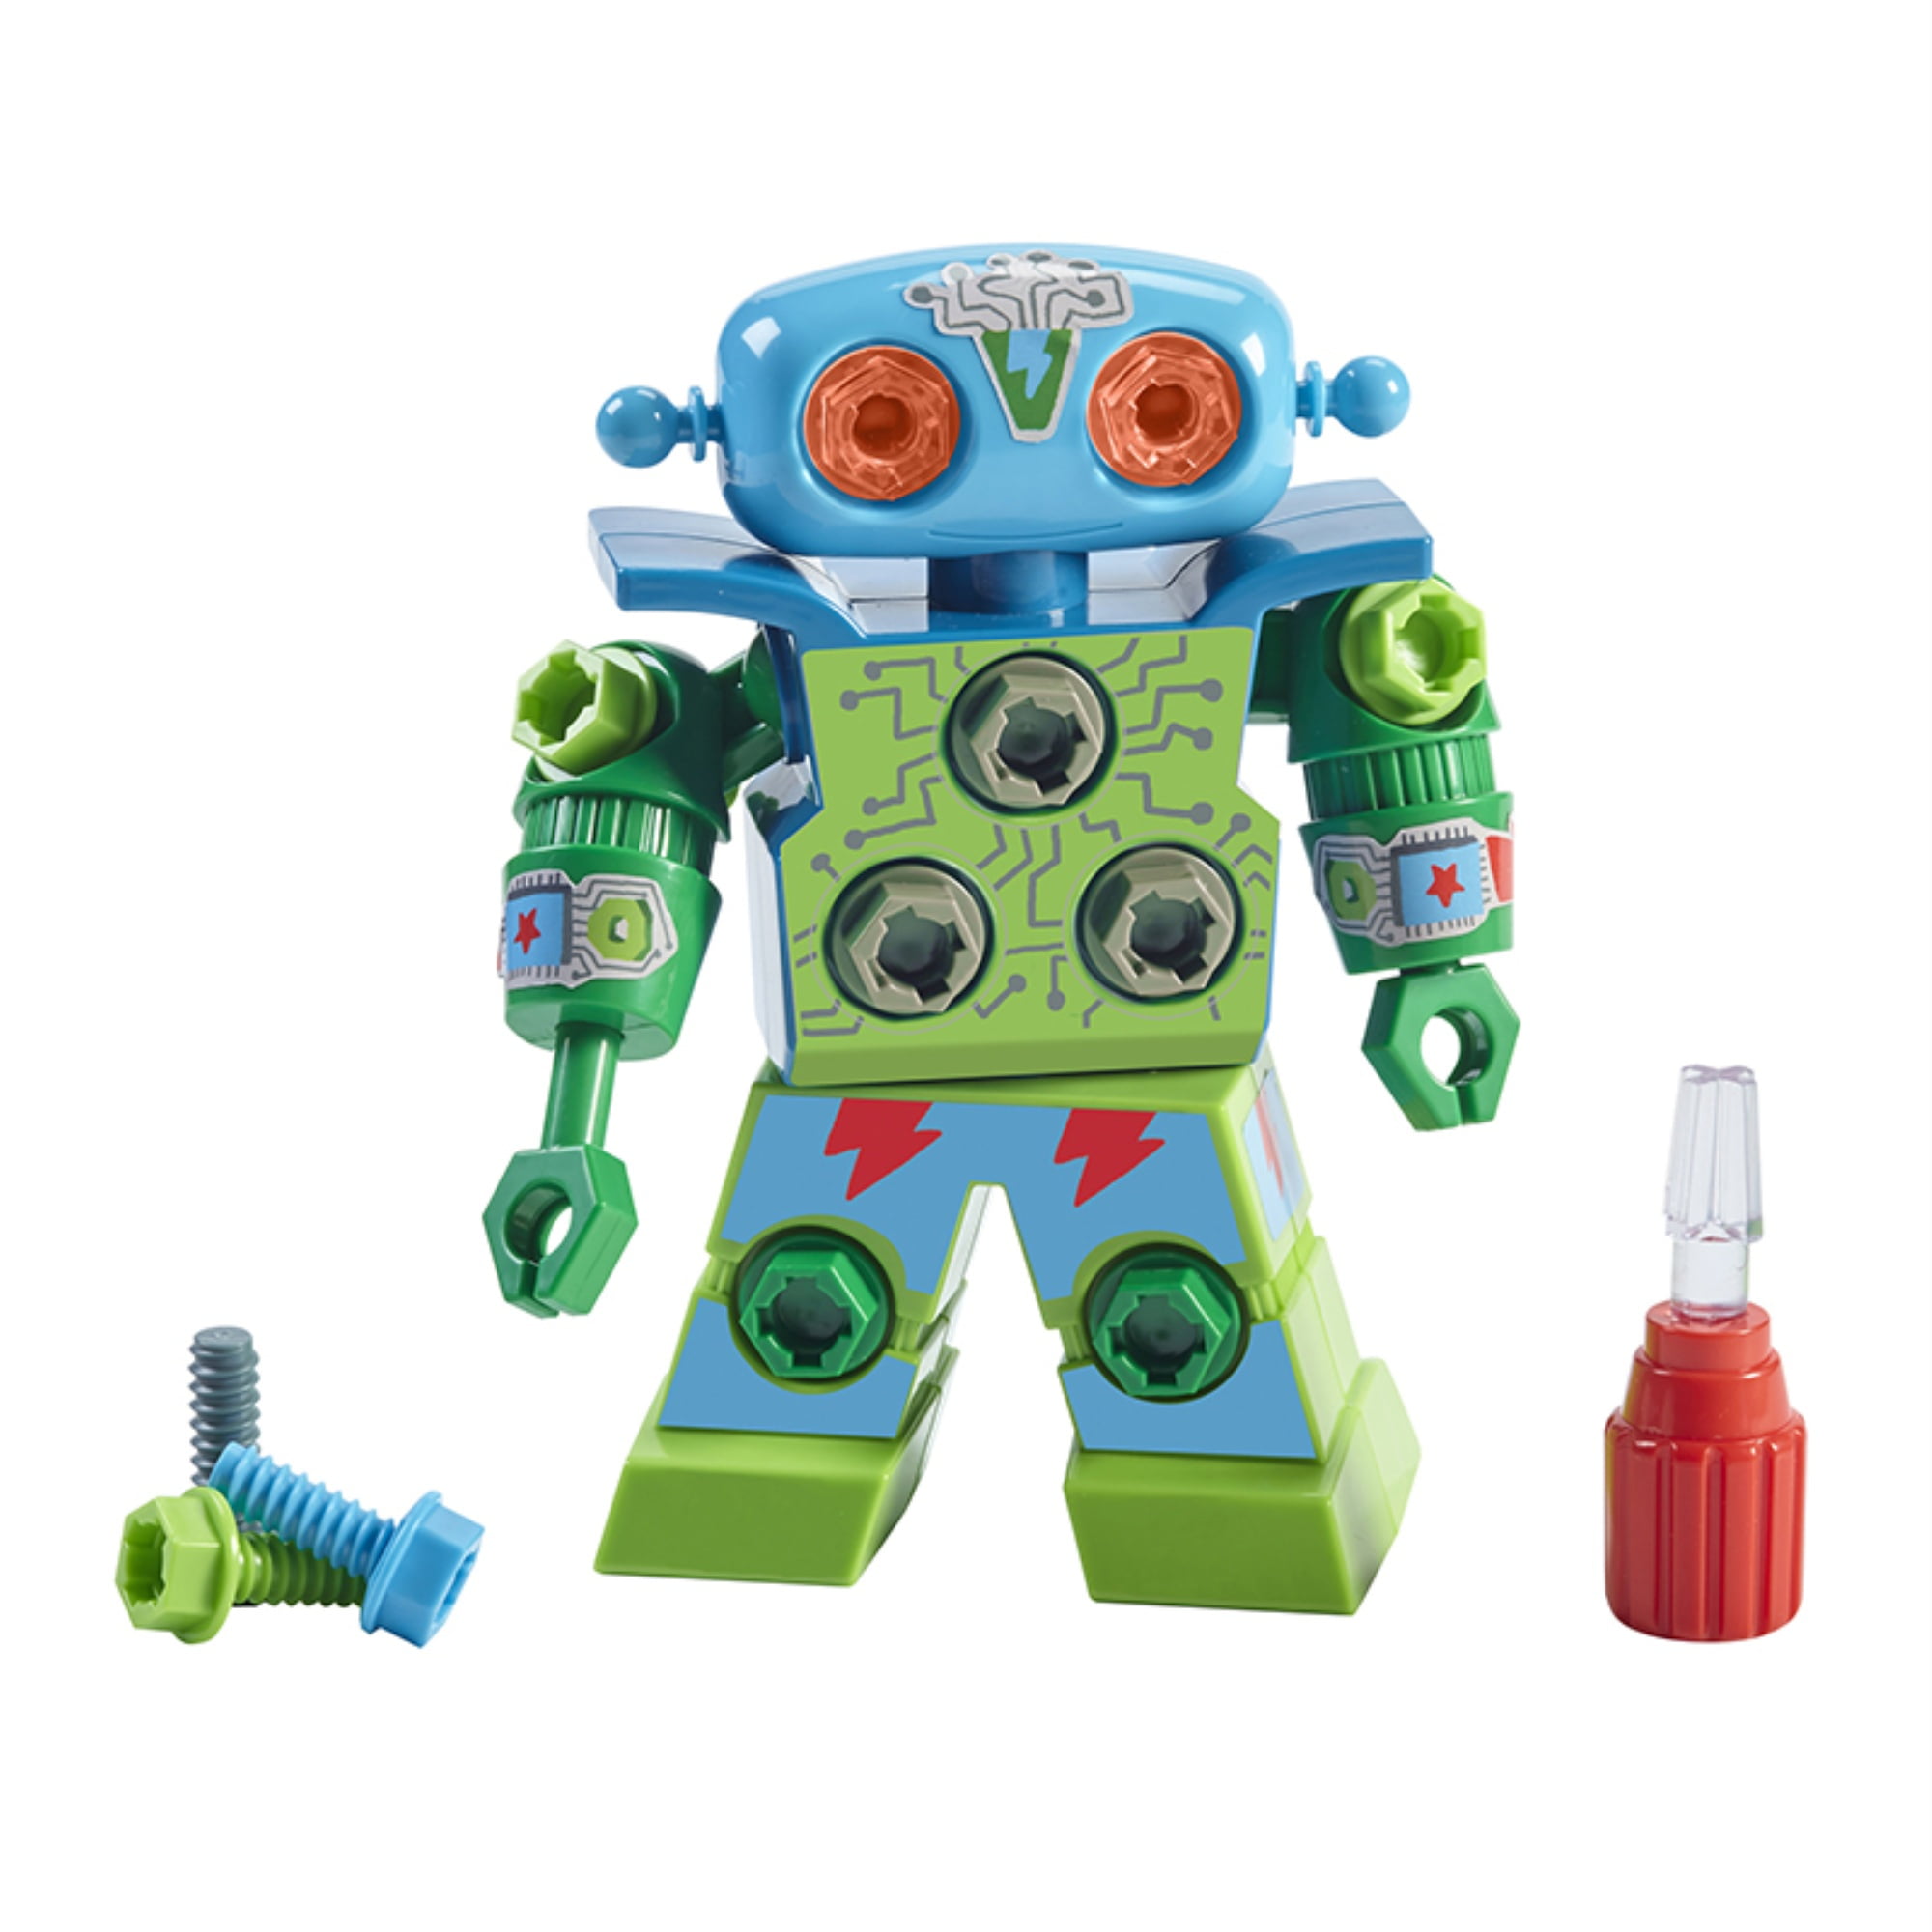 EDUCATIONAL KIDS TOYS For 2 3 4 5 6 7 Year Olds Age Xmas Gift Children Robot NEW 